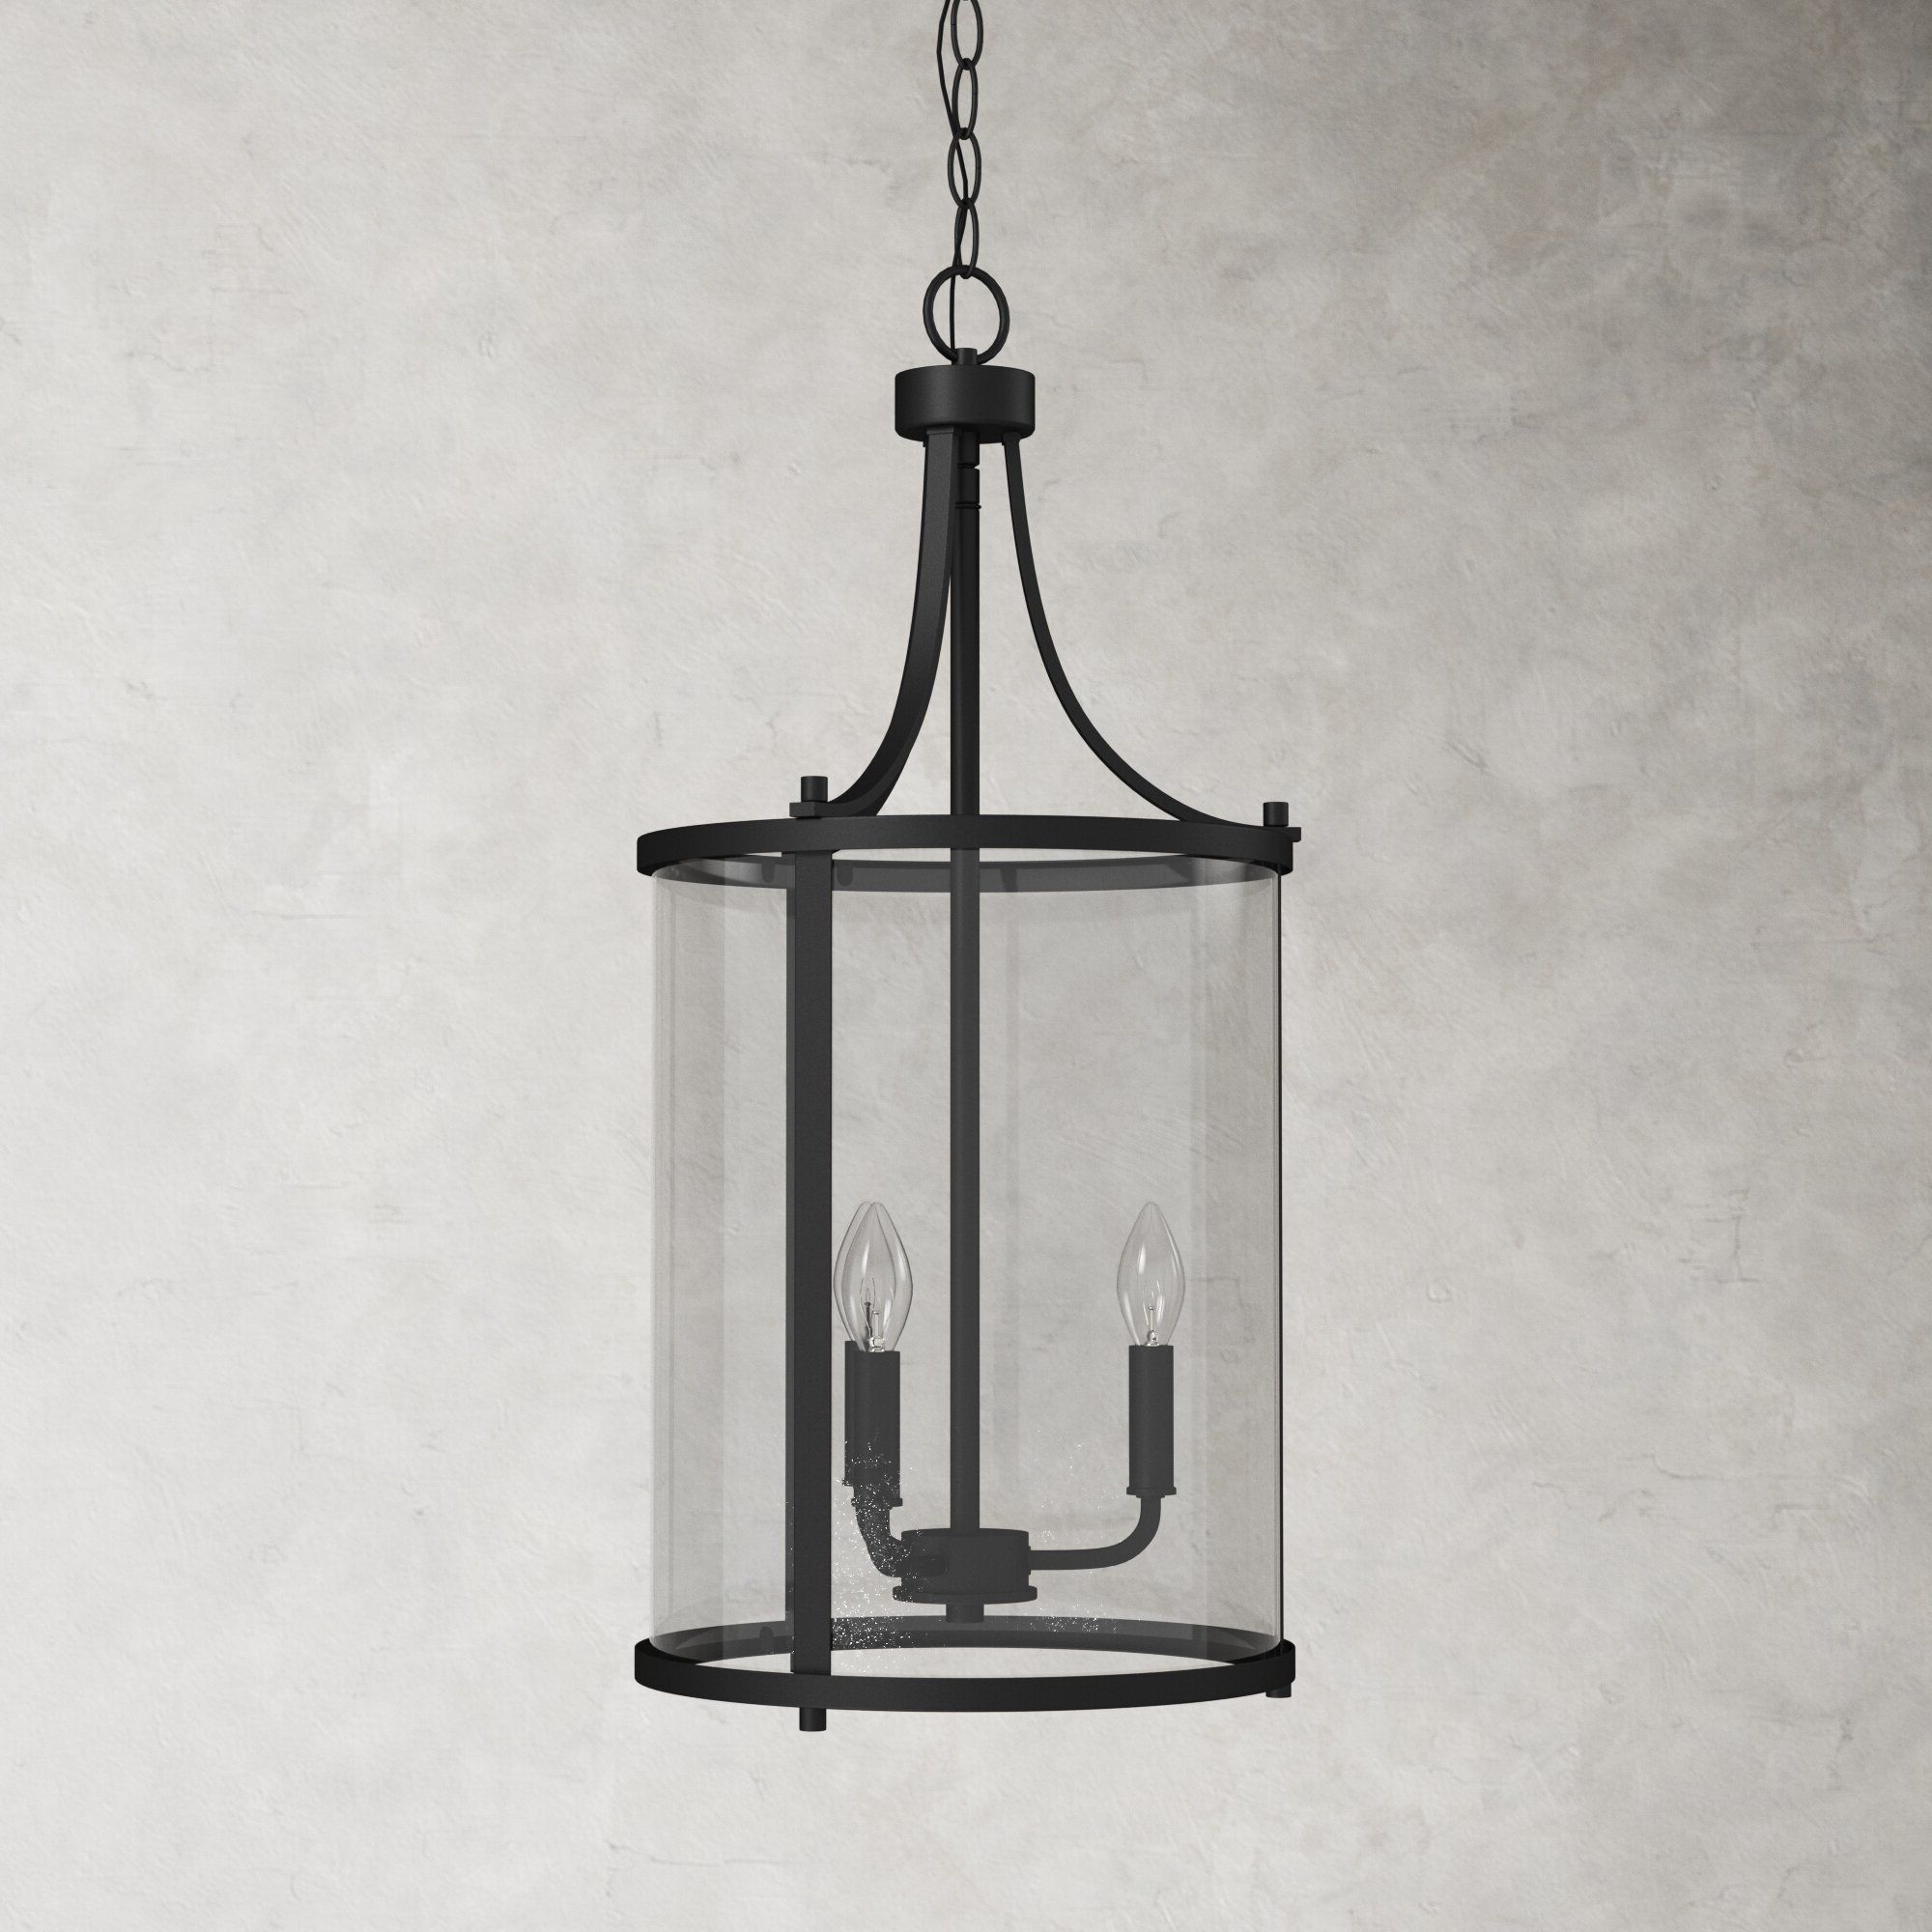 Black Finish Lantern Chandeliers You'll Love In  (View 6 of 15)